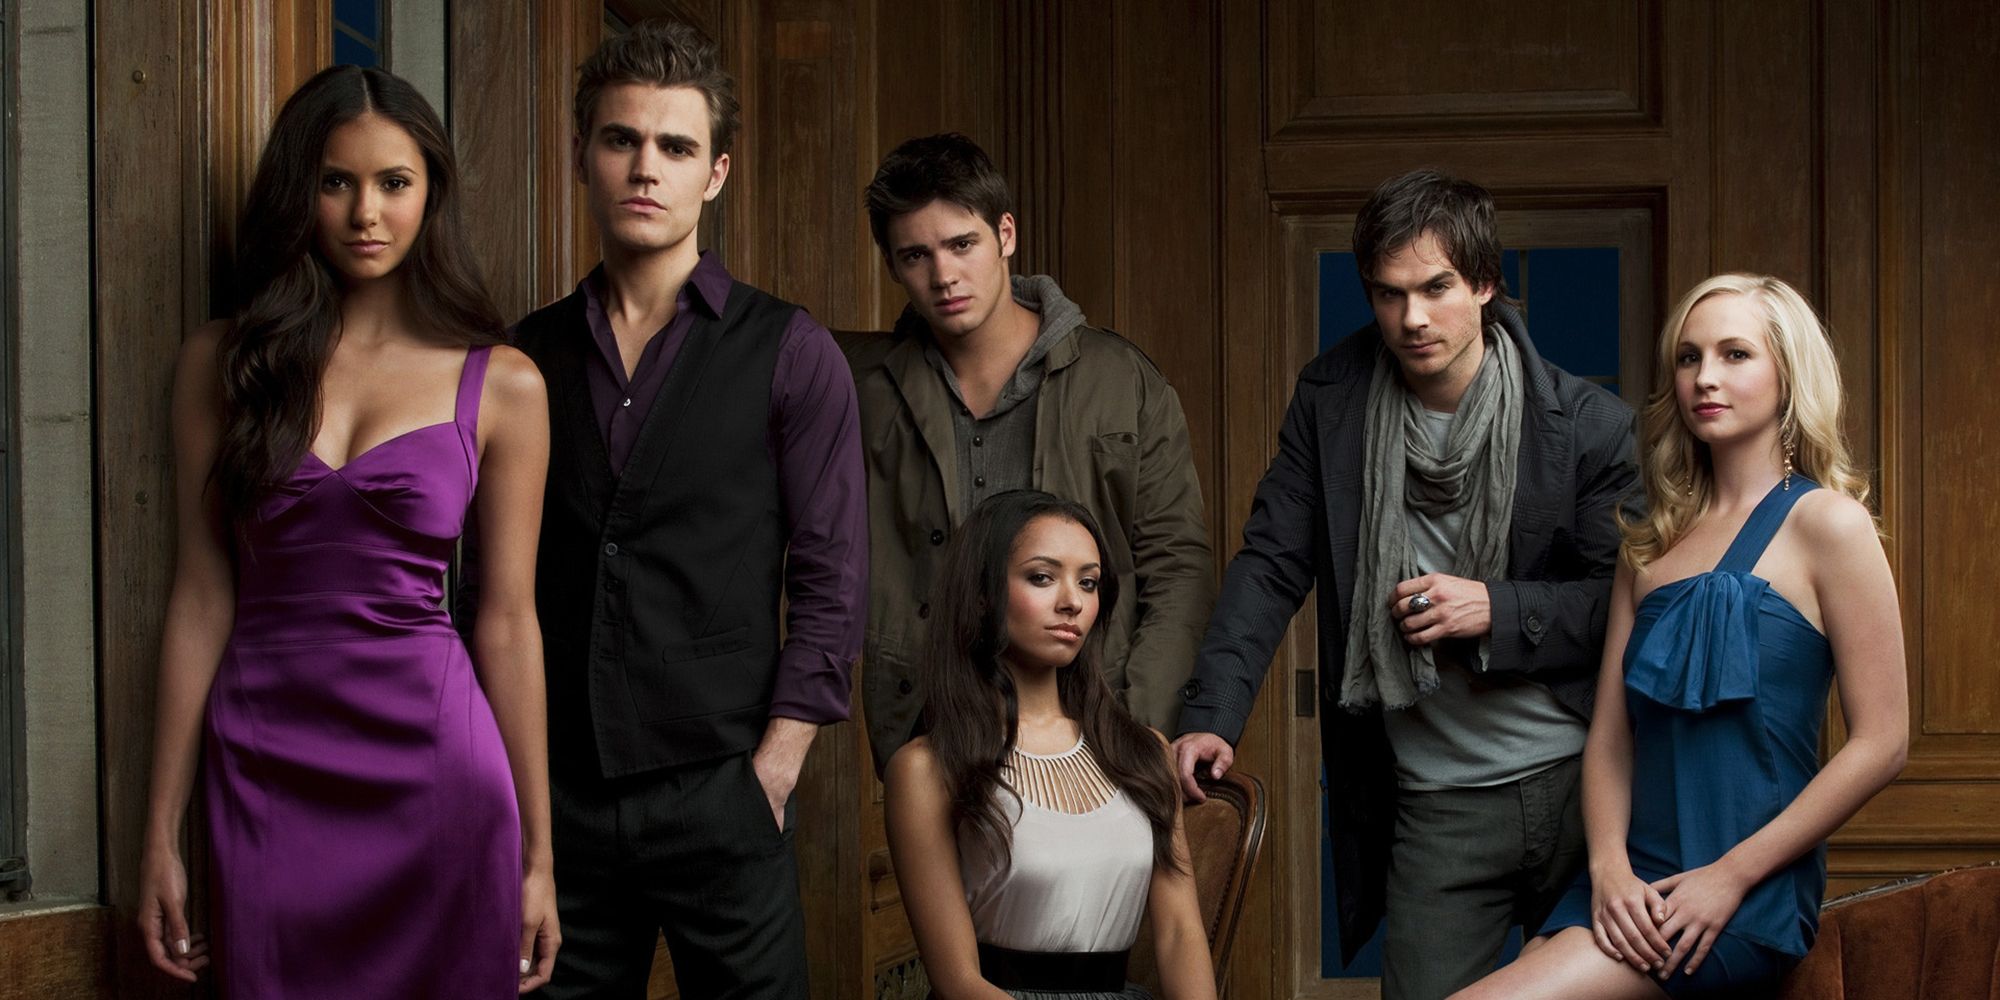 The cast of Vampire Diaries poses for a promotional photo.